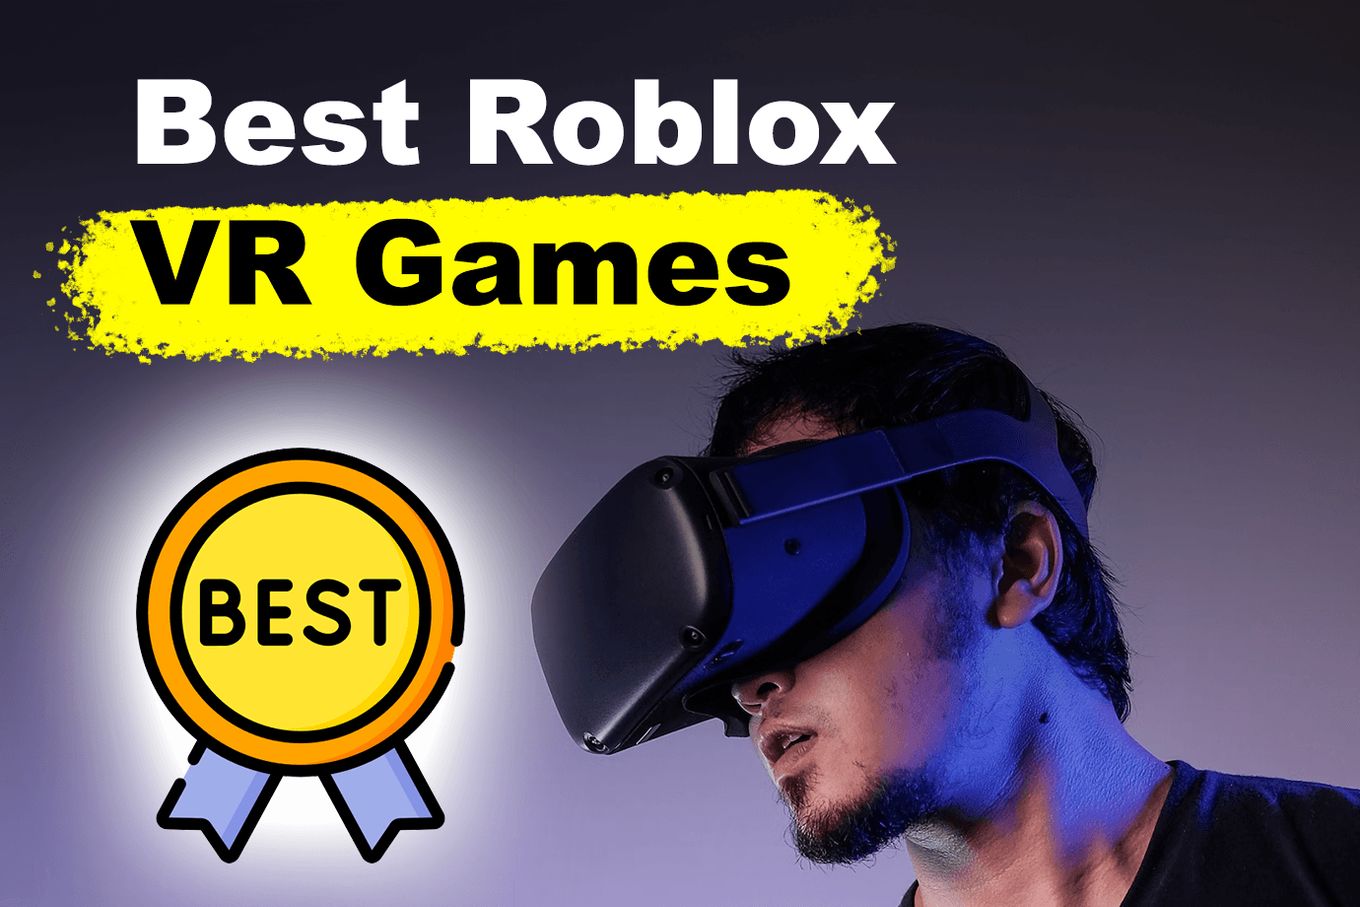 How to Play Roblox in VR - PC Guide